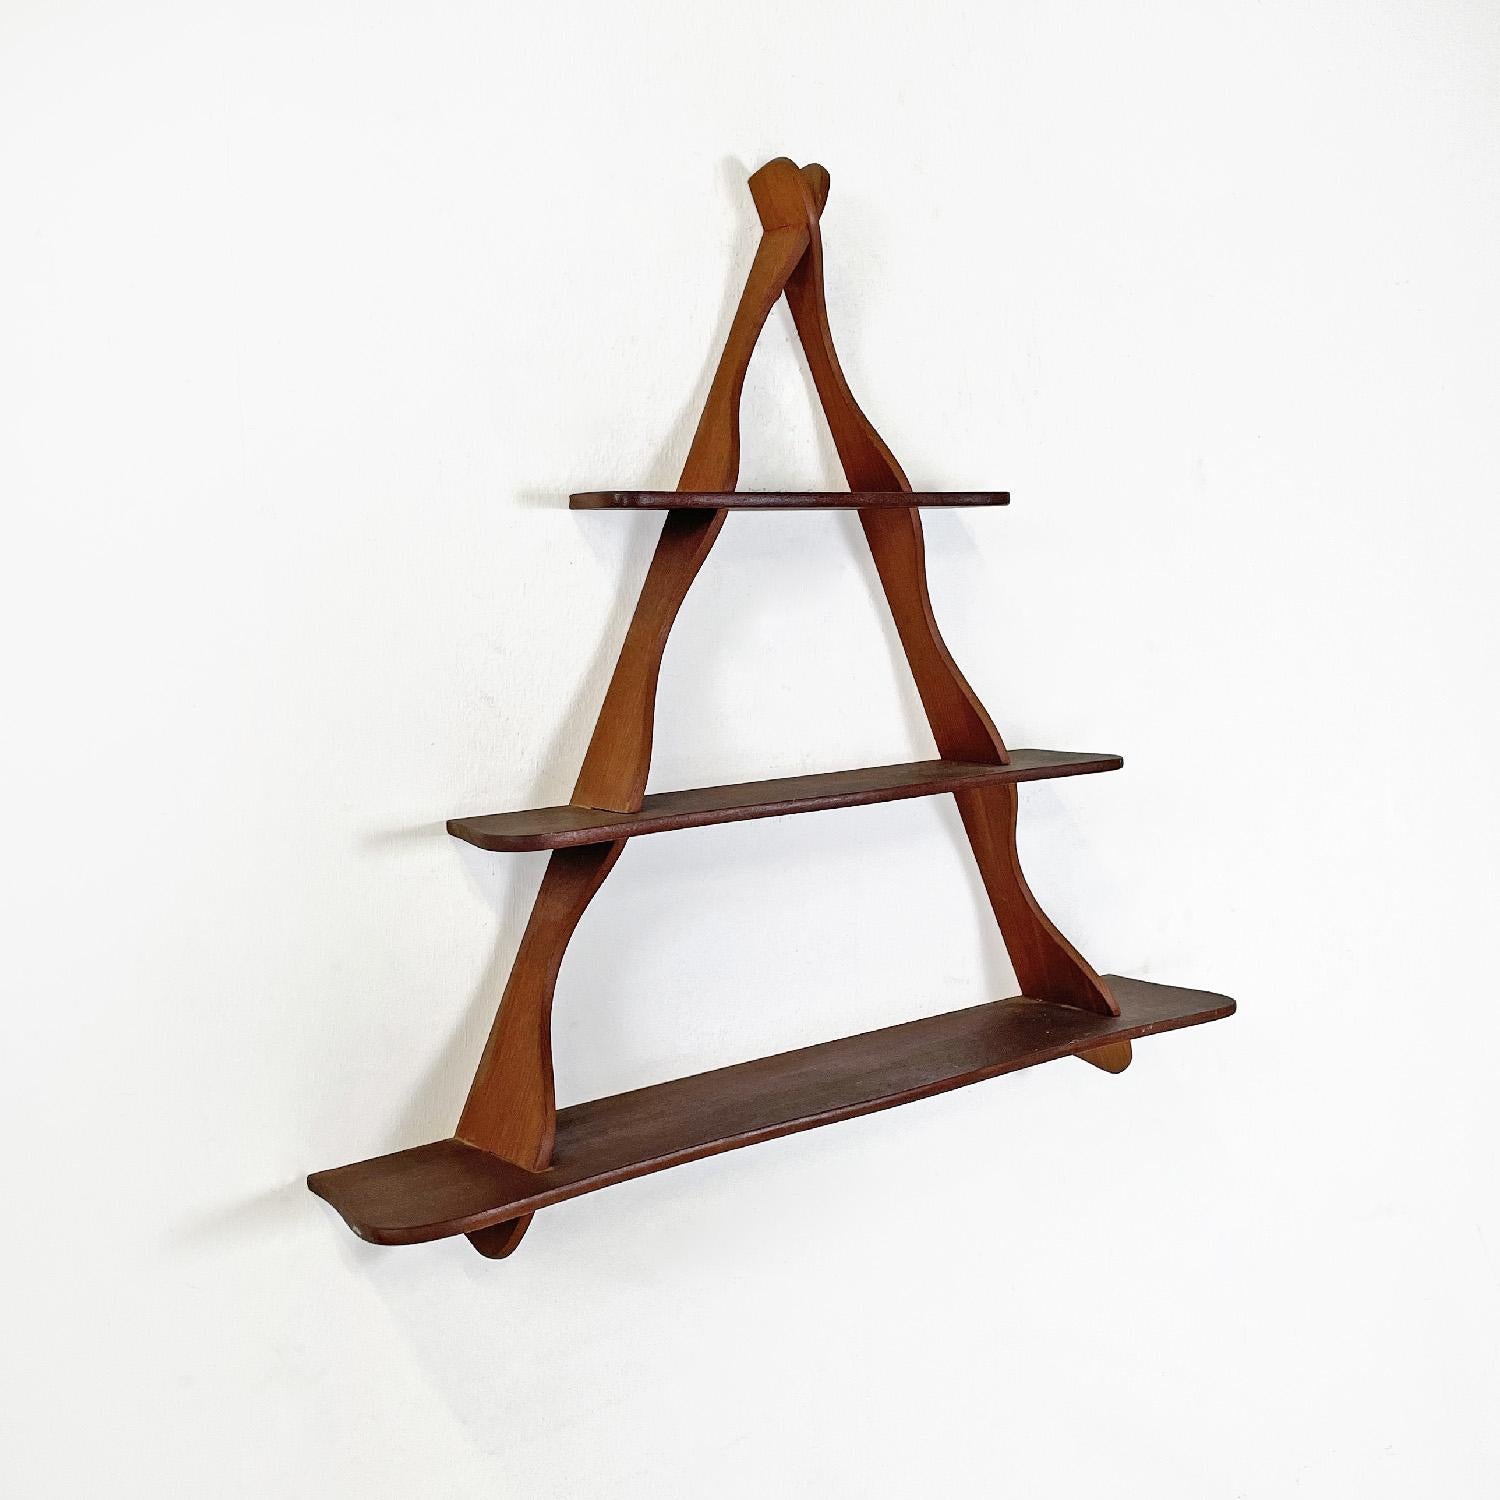 Swedish mid-century modern triangular solid teak wood bookcase by Vejle, 1960s
Bookcase in solid teak wood with a triangular shape. It has three entirely interlocking shelves, all the elements that compose it have soft and curved lines.
Swedish